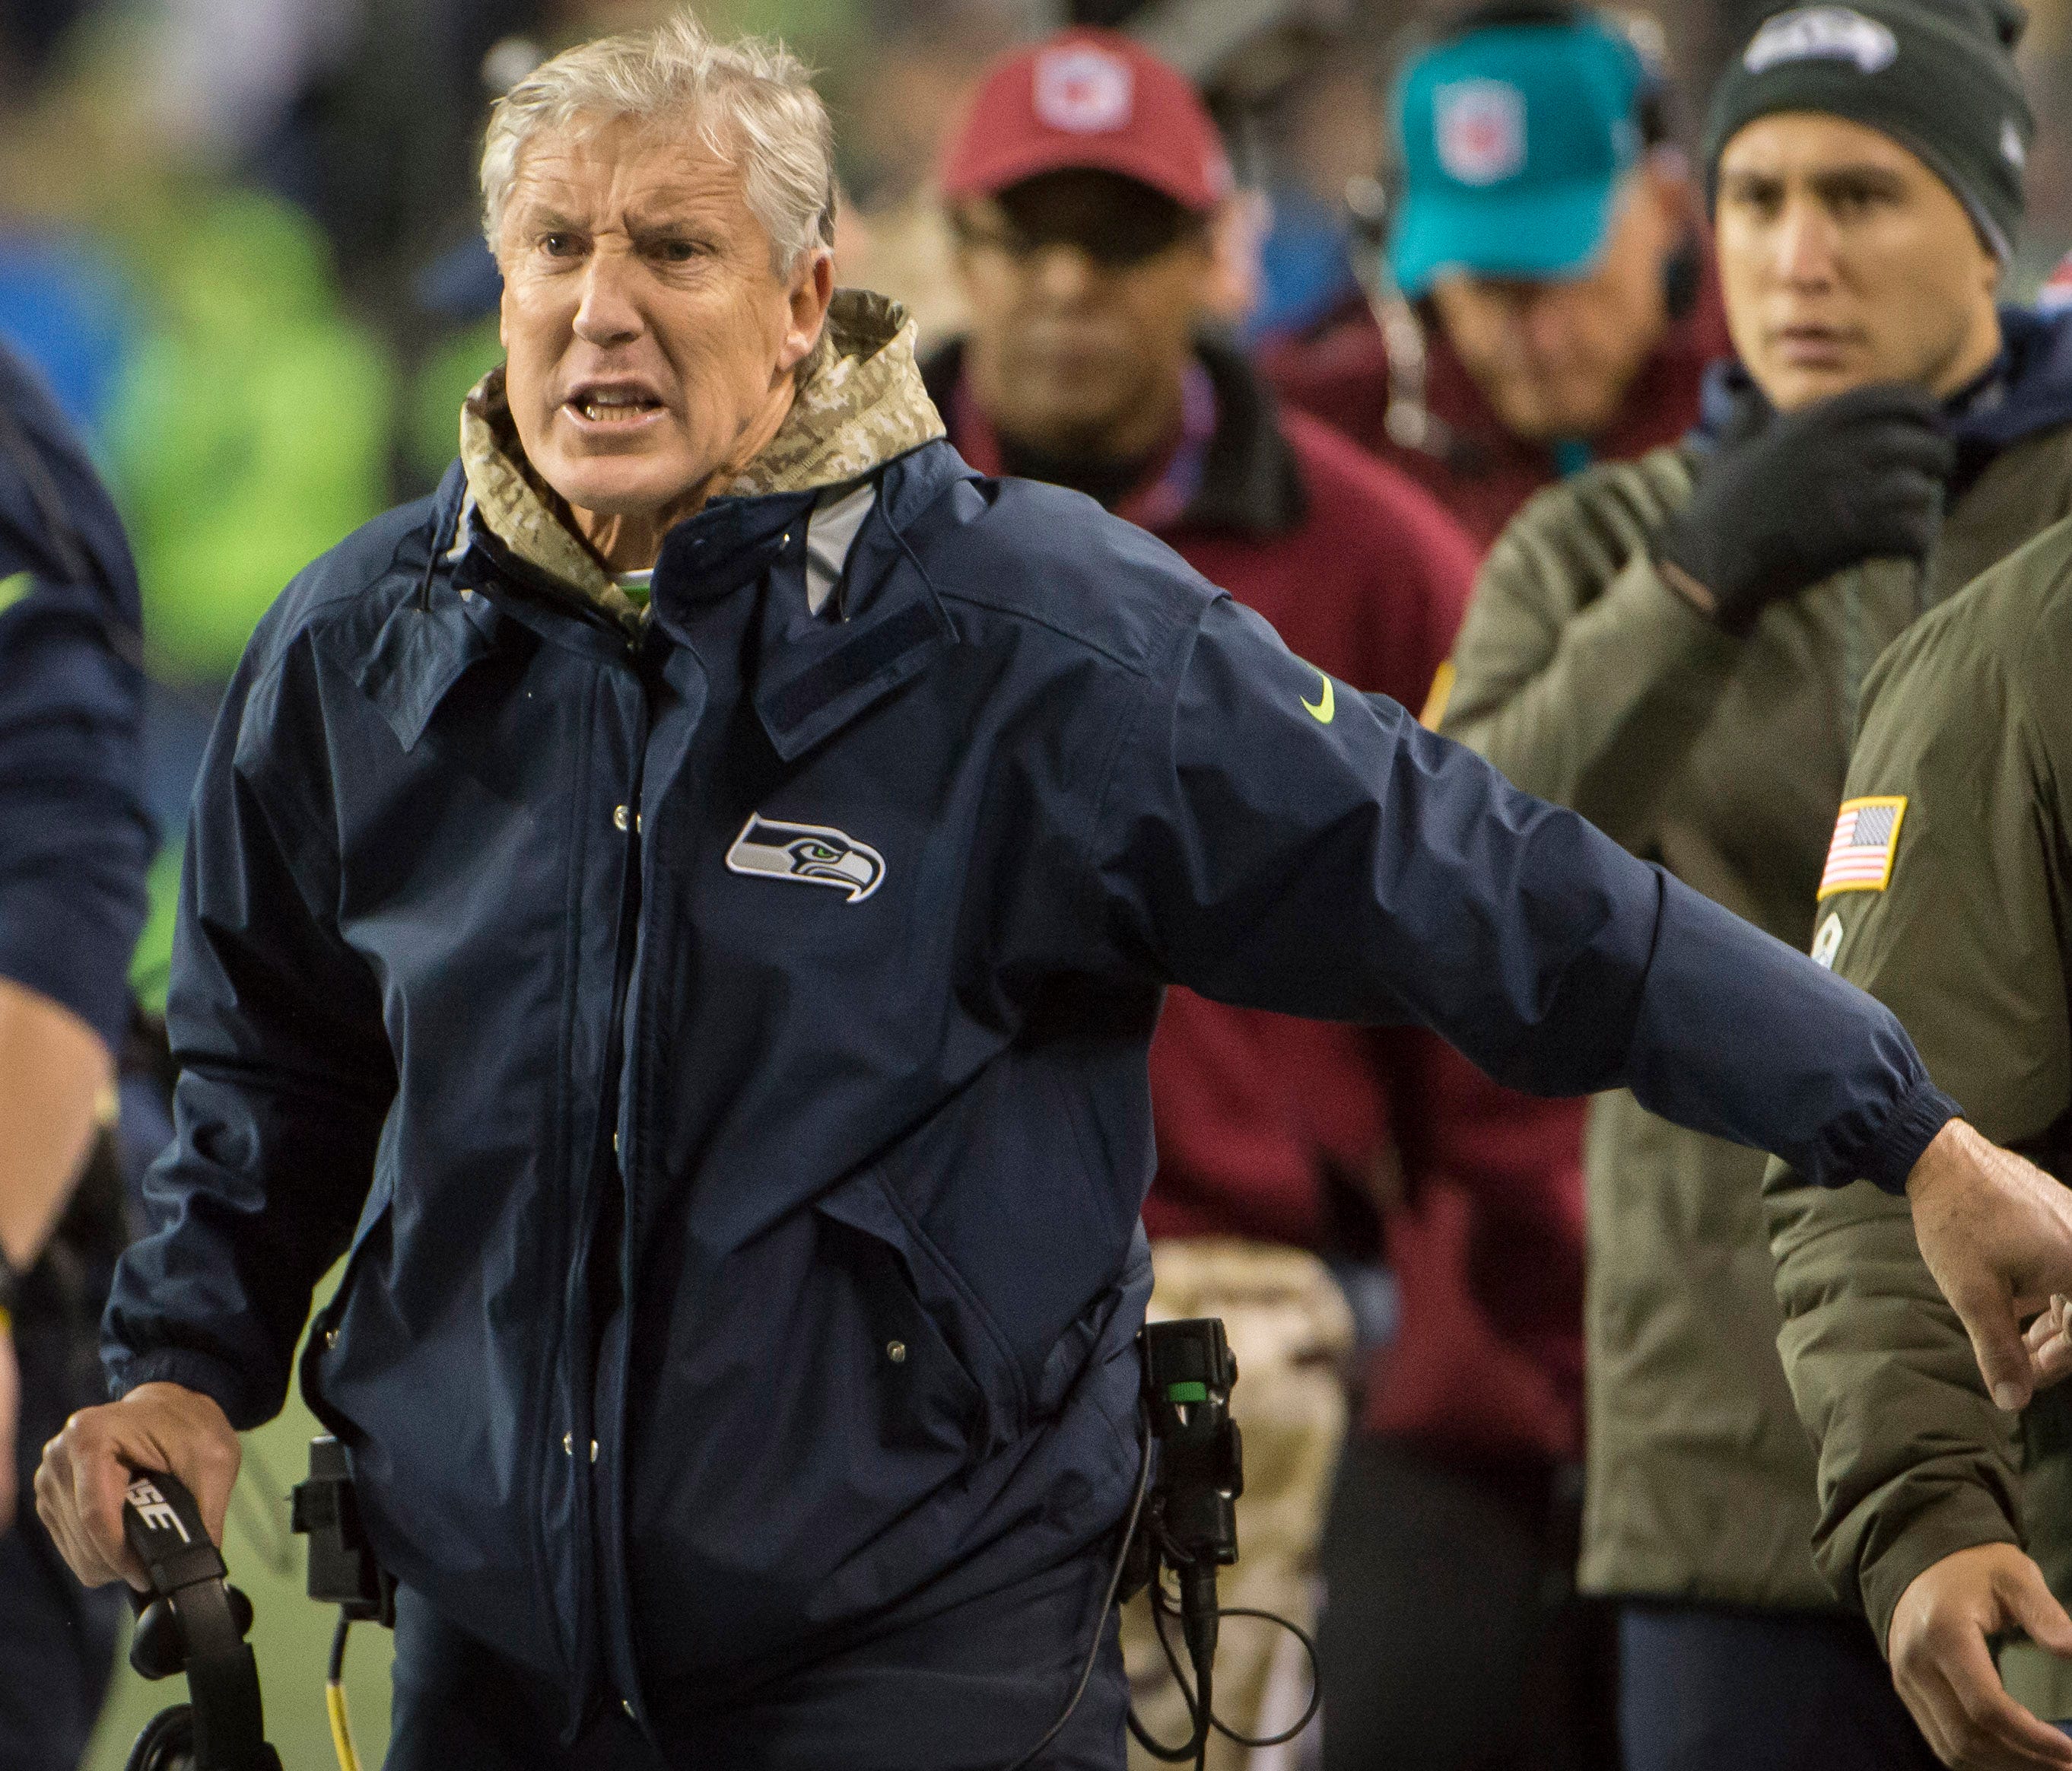 Seahawks coach Pete Carroll complains to an official about a non-call during the second half against the Falcons at CenturyLink Field in Seattle.